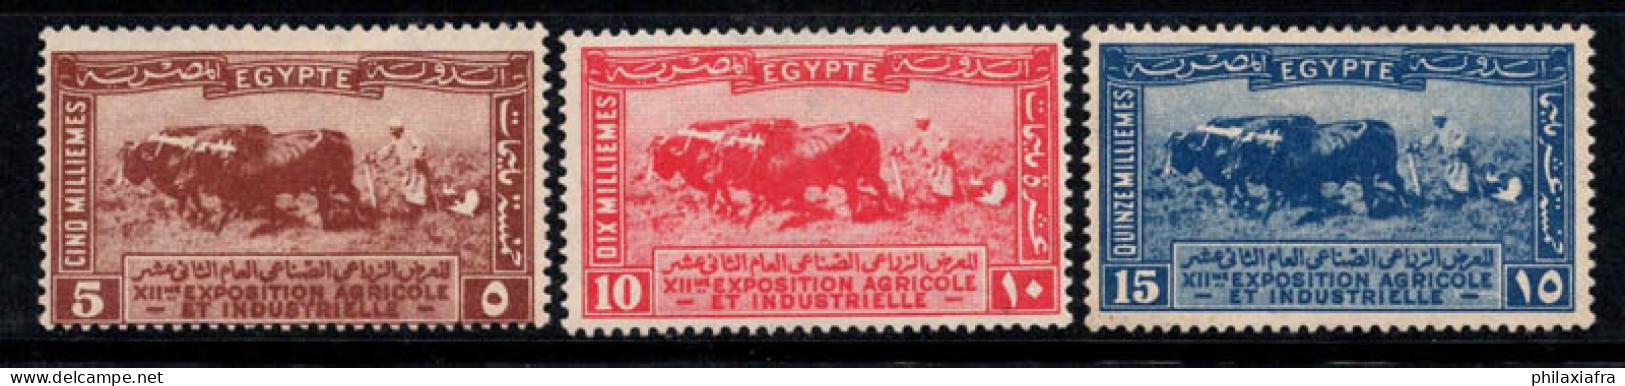 Égypte 1925 Mi. 97-99 Neuf * MH 80% Agriculture, Animaux - Unused Stamps